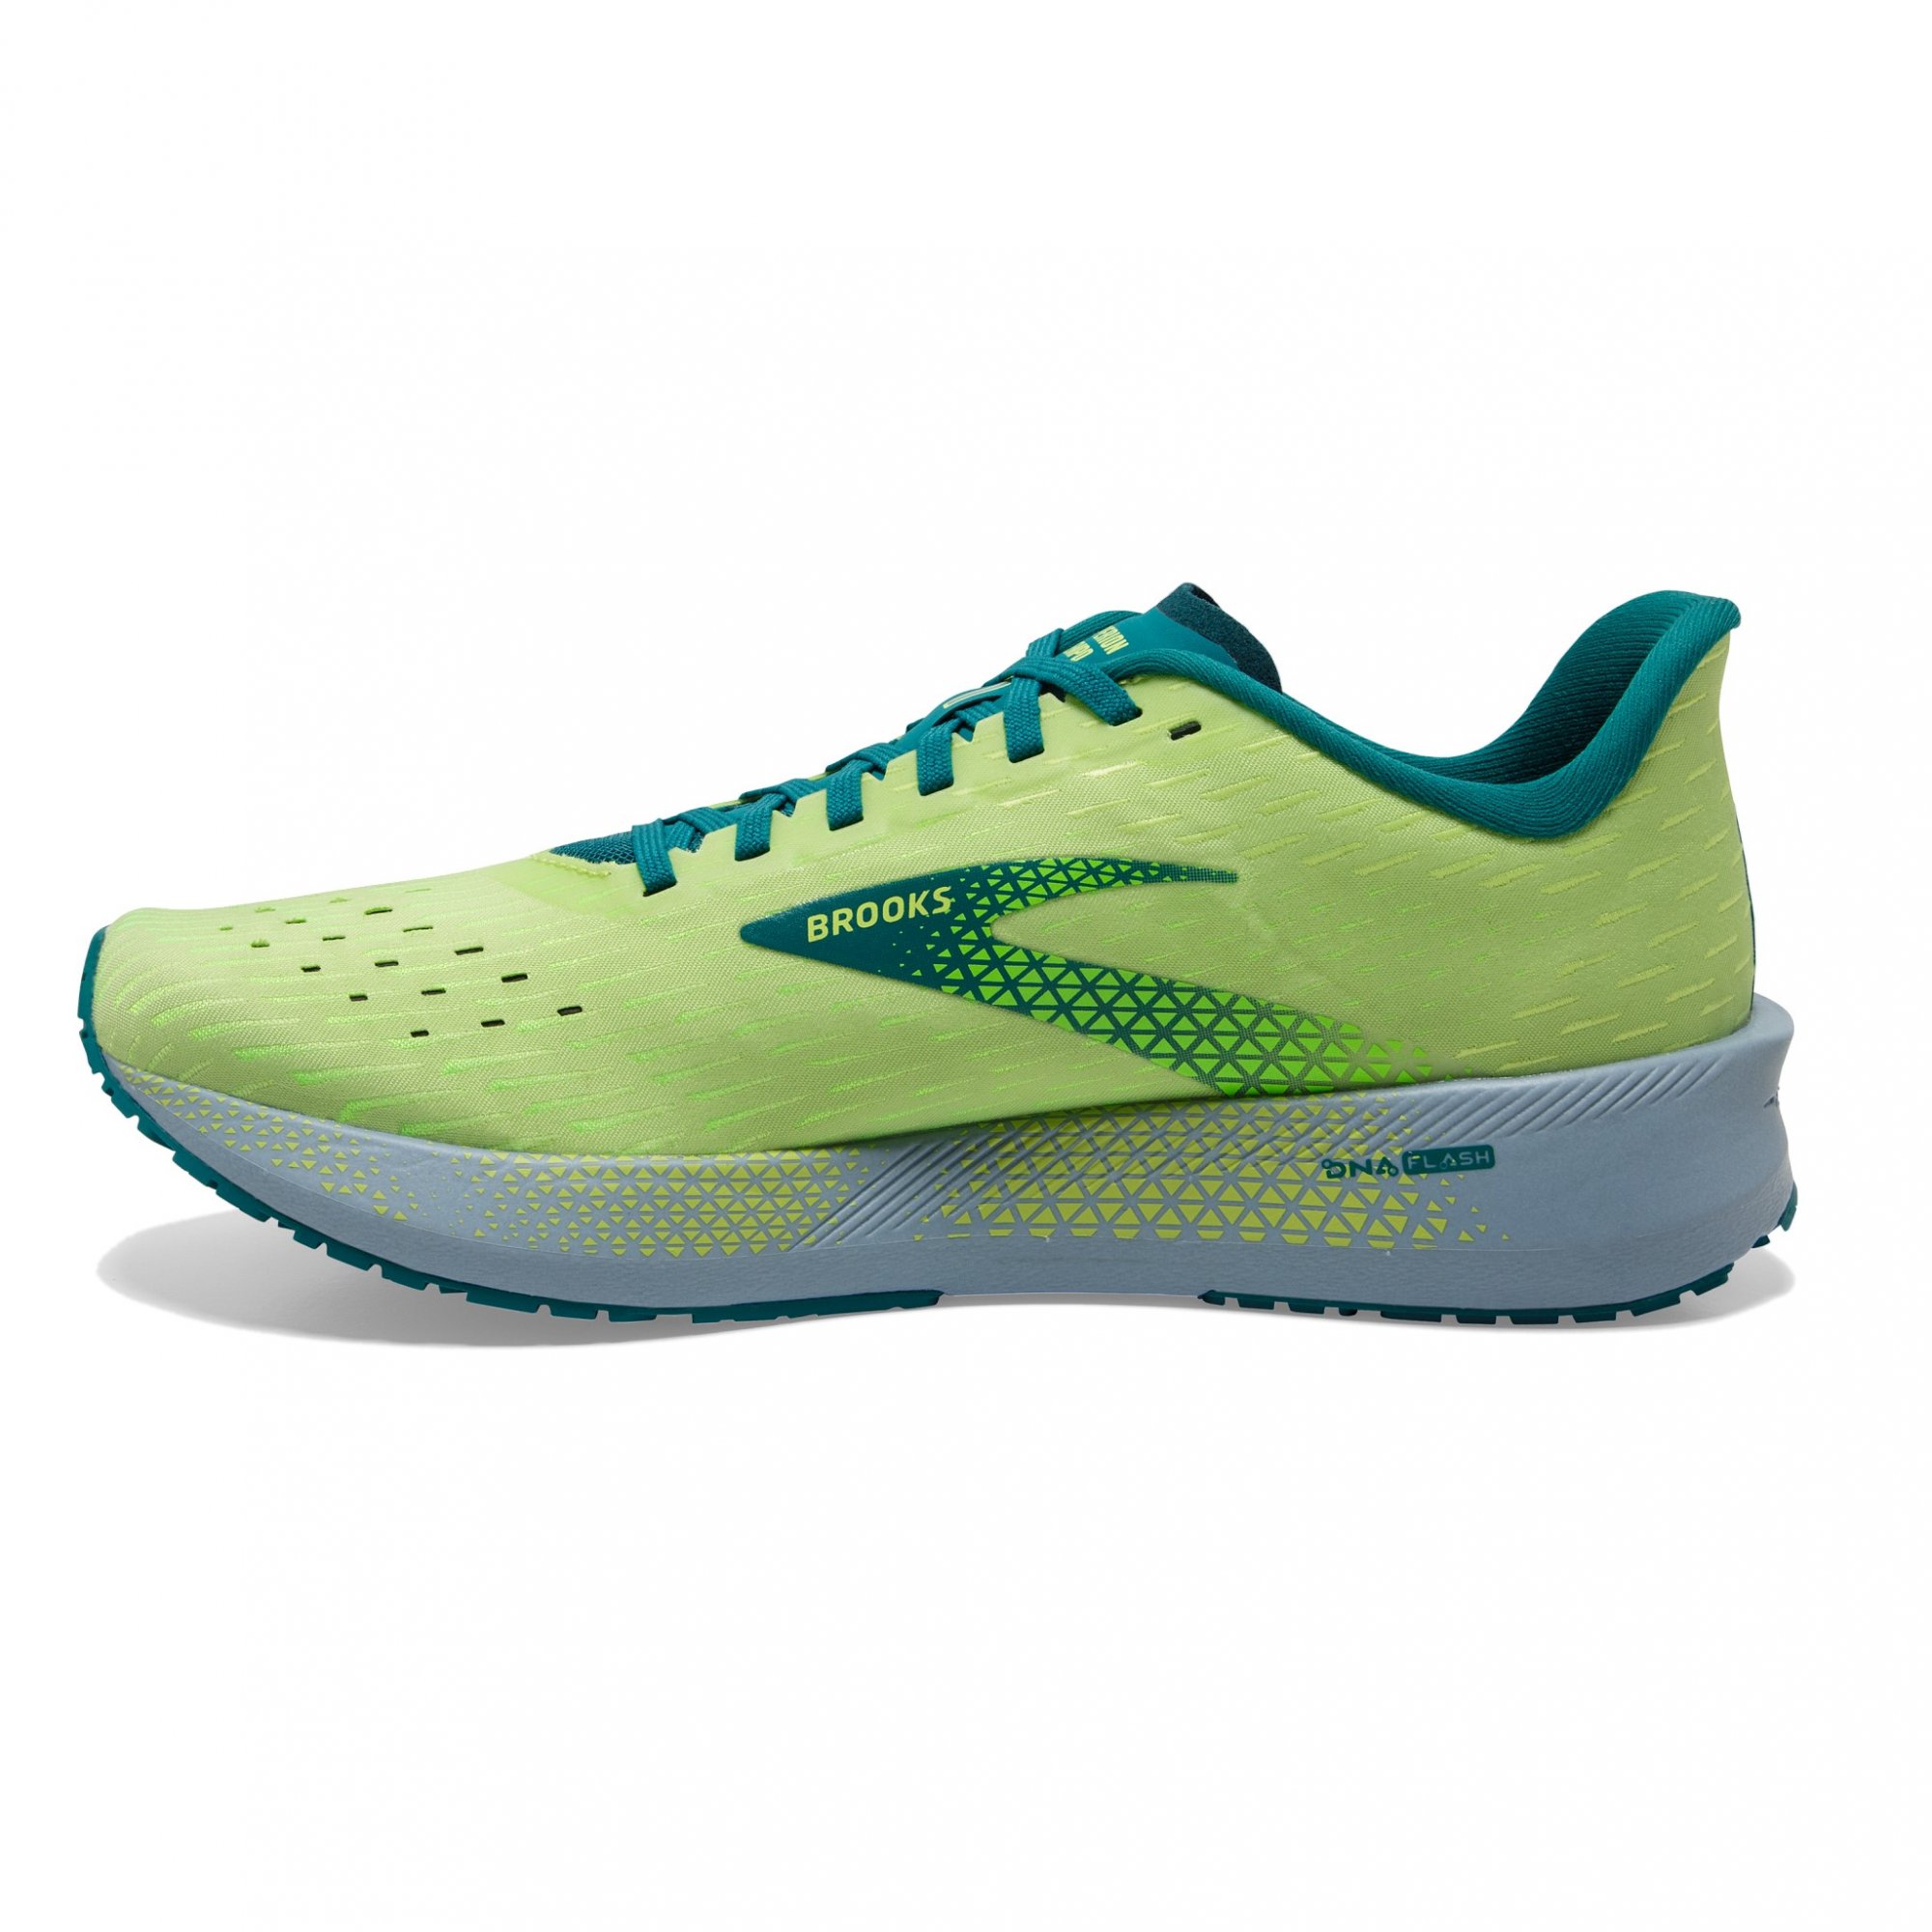 BROOKS Hyperion Tempo Green/Kayaking/Dusty Blue